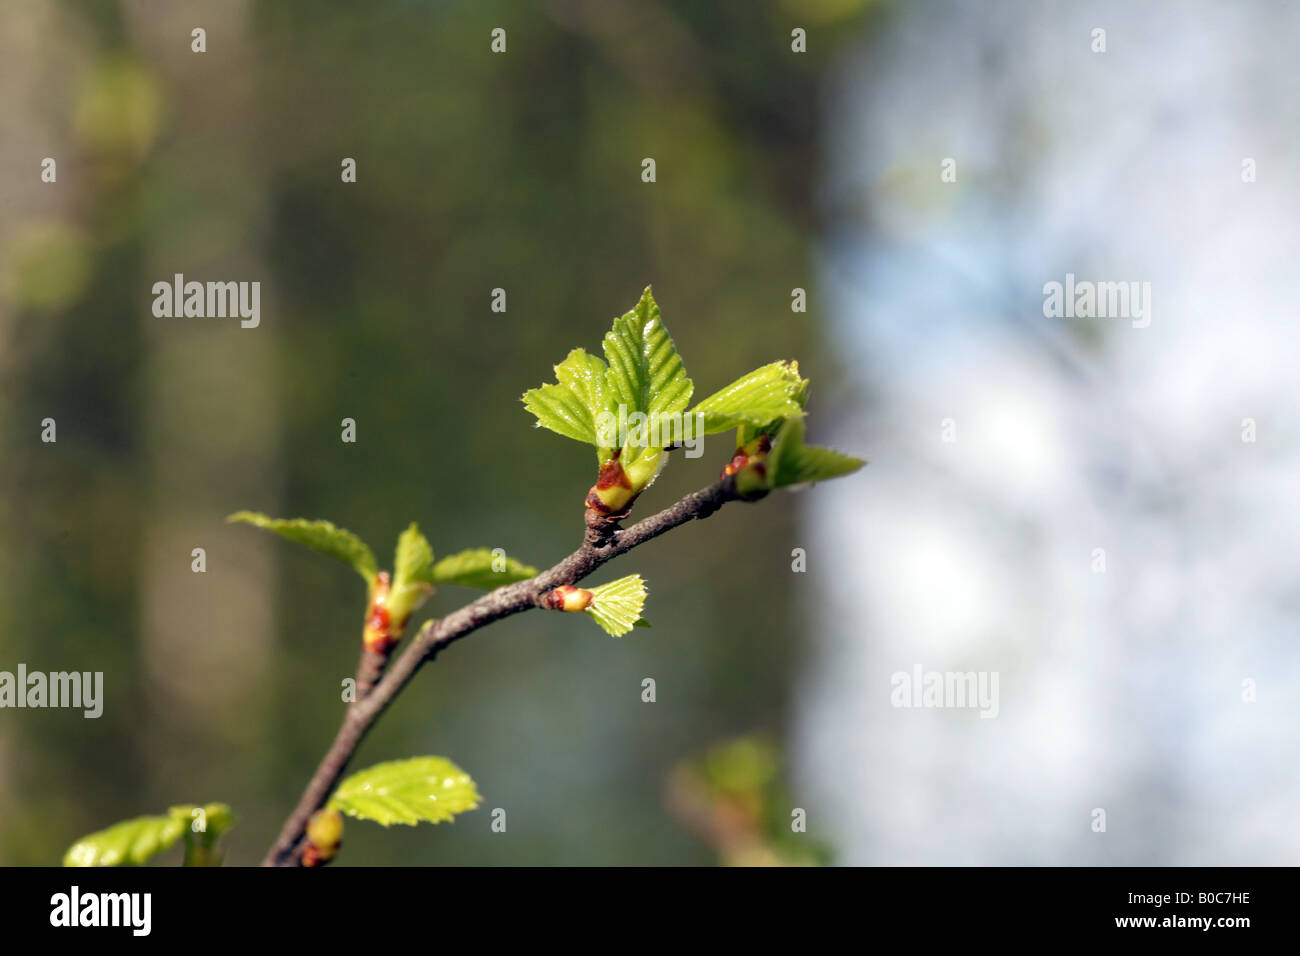 Silver Birch Tree,  Betula pendula, leaves emerging in spring.Cheshire, England Stock Photo